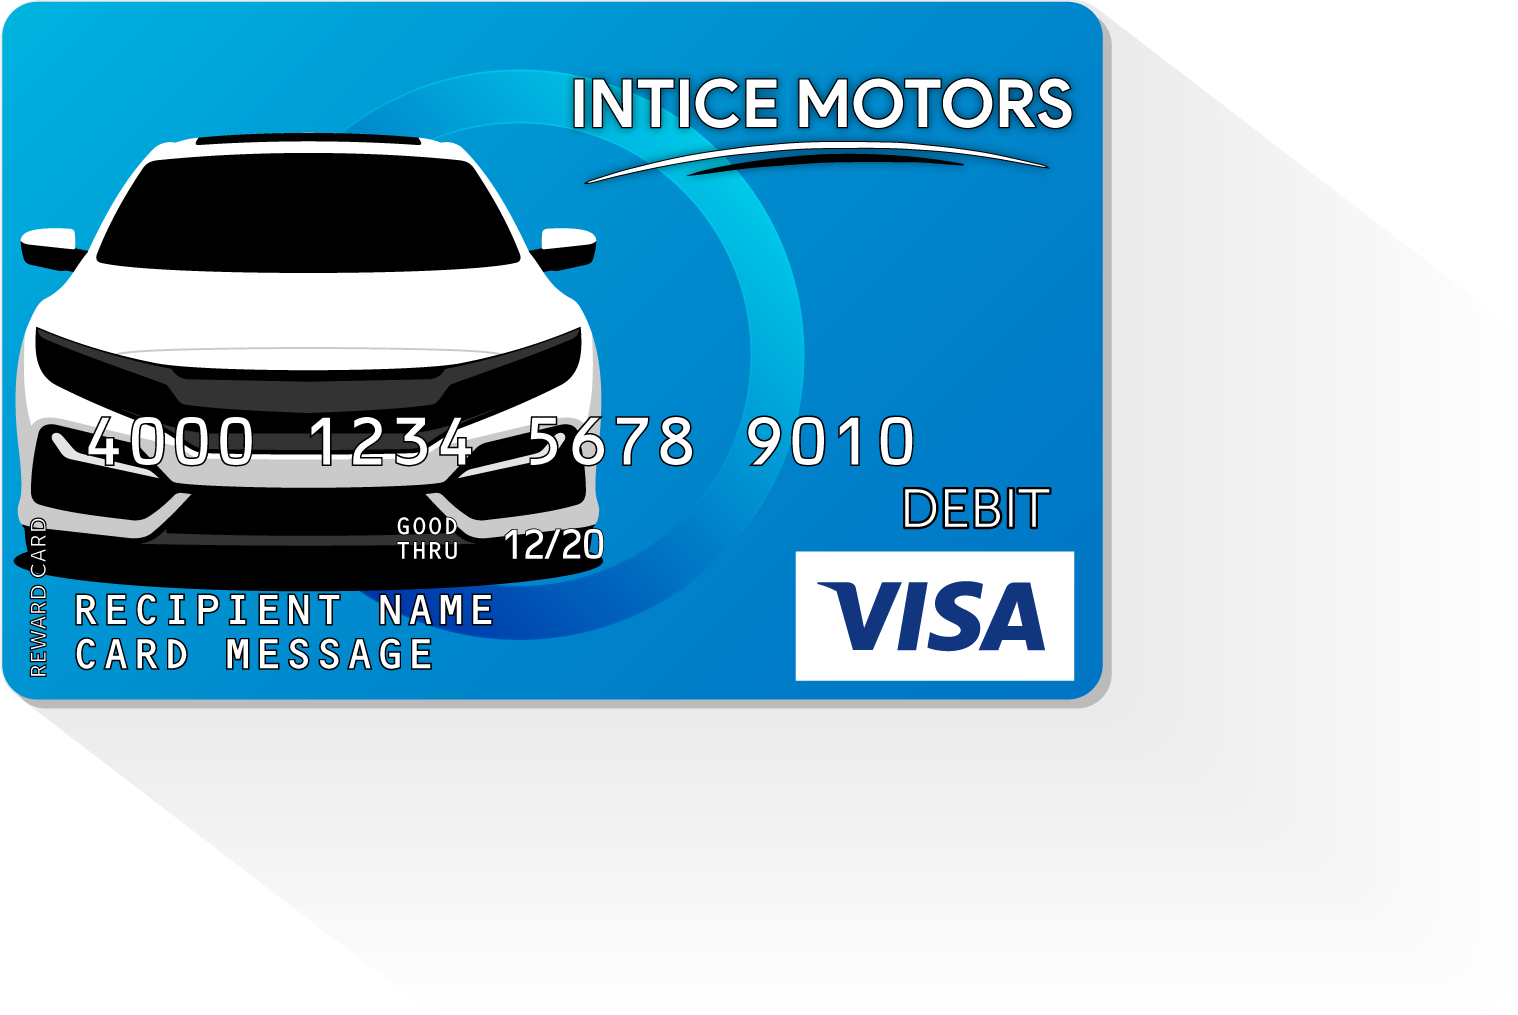 A Visa Giftcard with a Car on the front, used as an example for Visa Express Test Drive